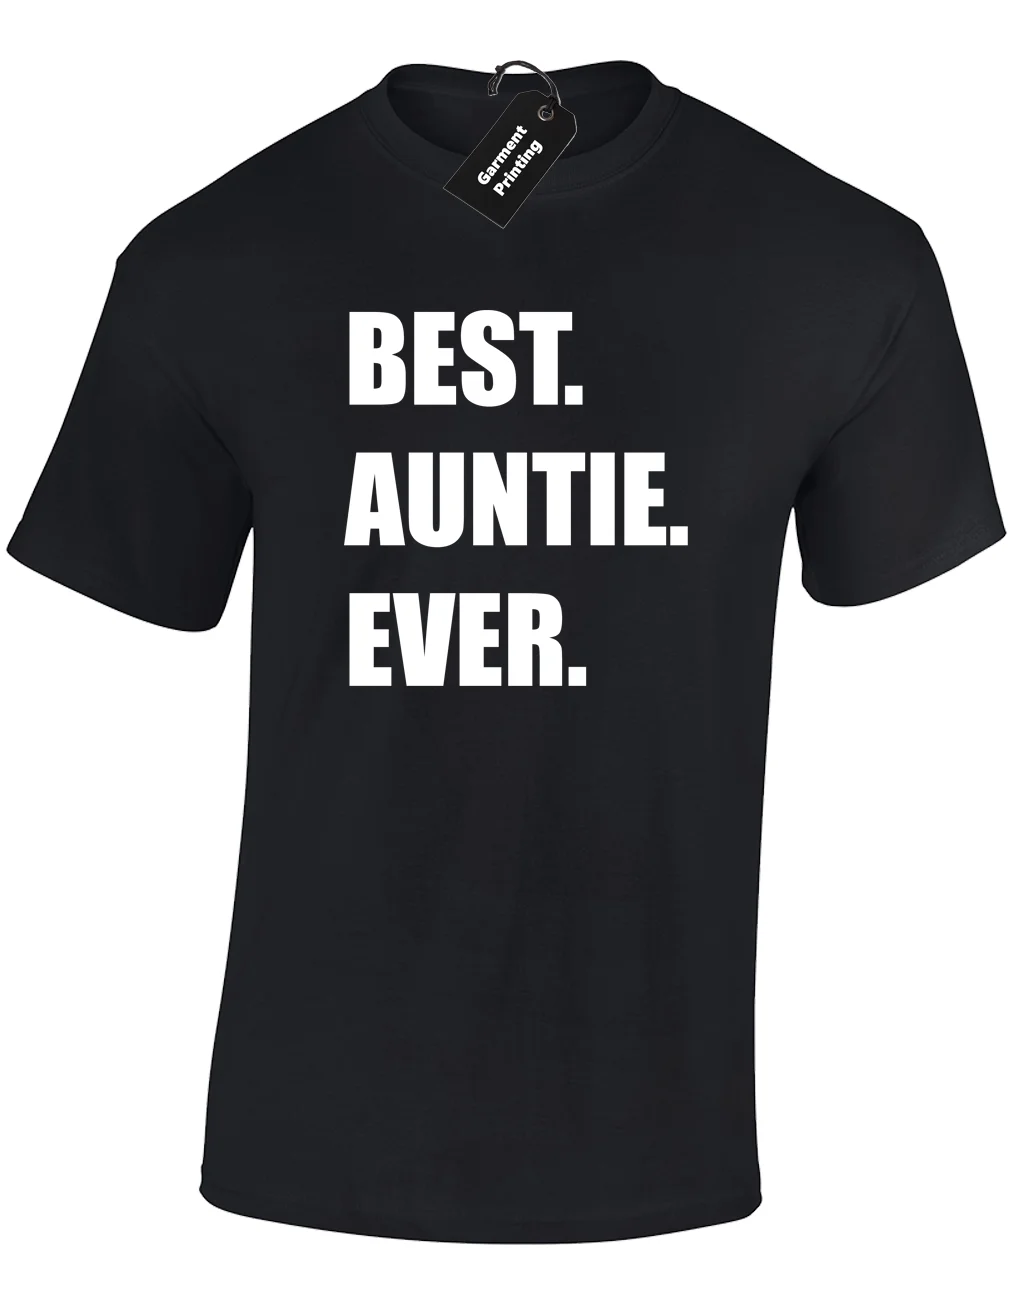 BEST AUNTIE EVER UNISEX T-SHIRT FUNNY PRINTED SLOGAN DESIGN NEW GIFT TOP IDEACool Casual pride t shirt men Unisex New Fashion | Мужская